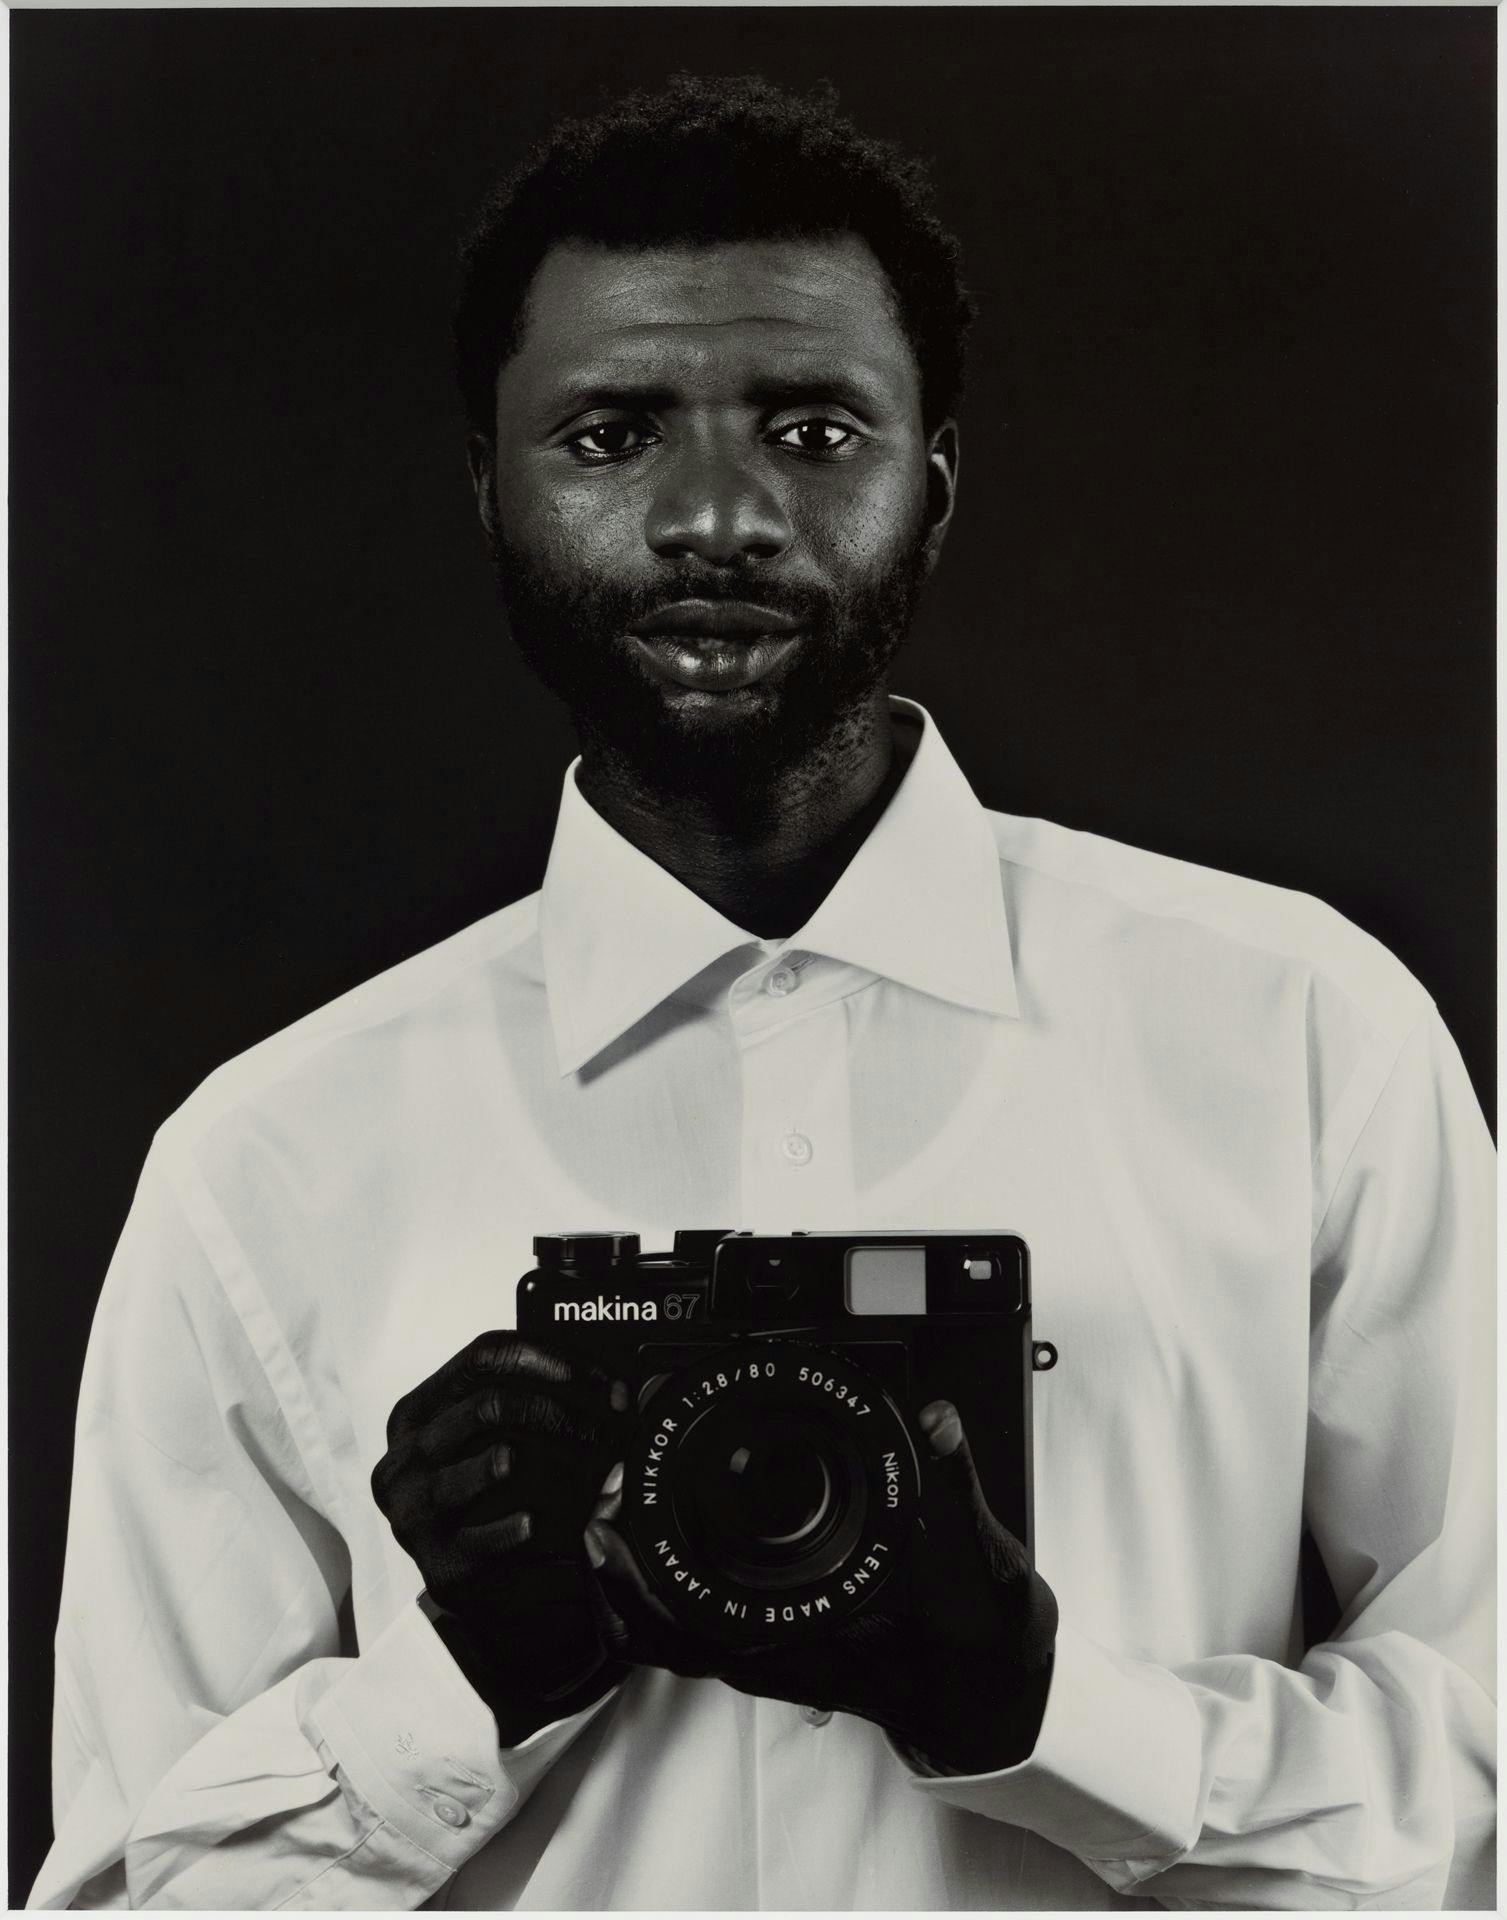 A photograph by Christopher Williams titled Mustafa Kinte (Gambia)‚Ä¶, dated 2008.